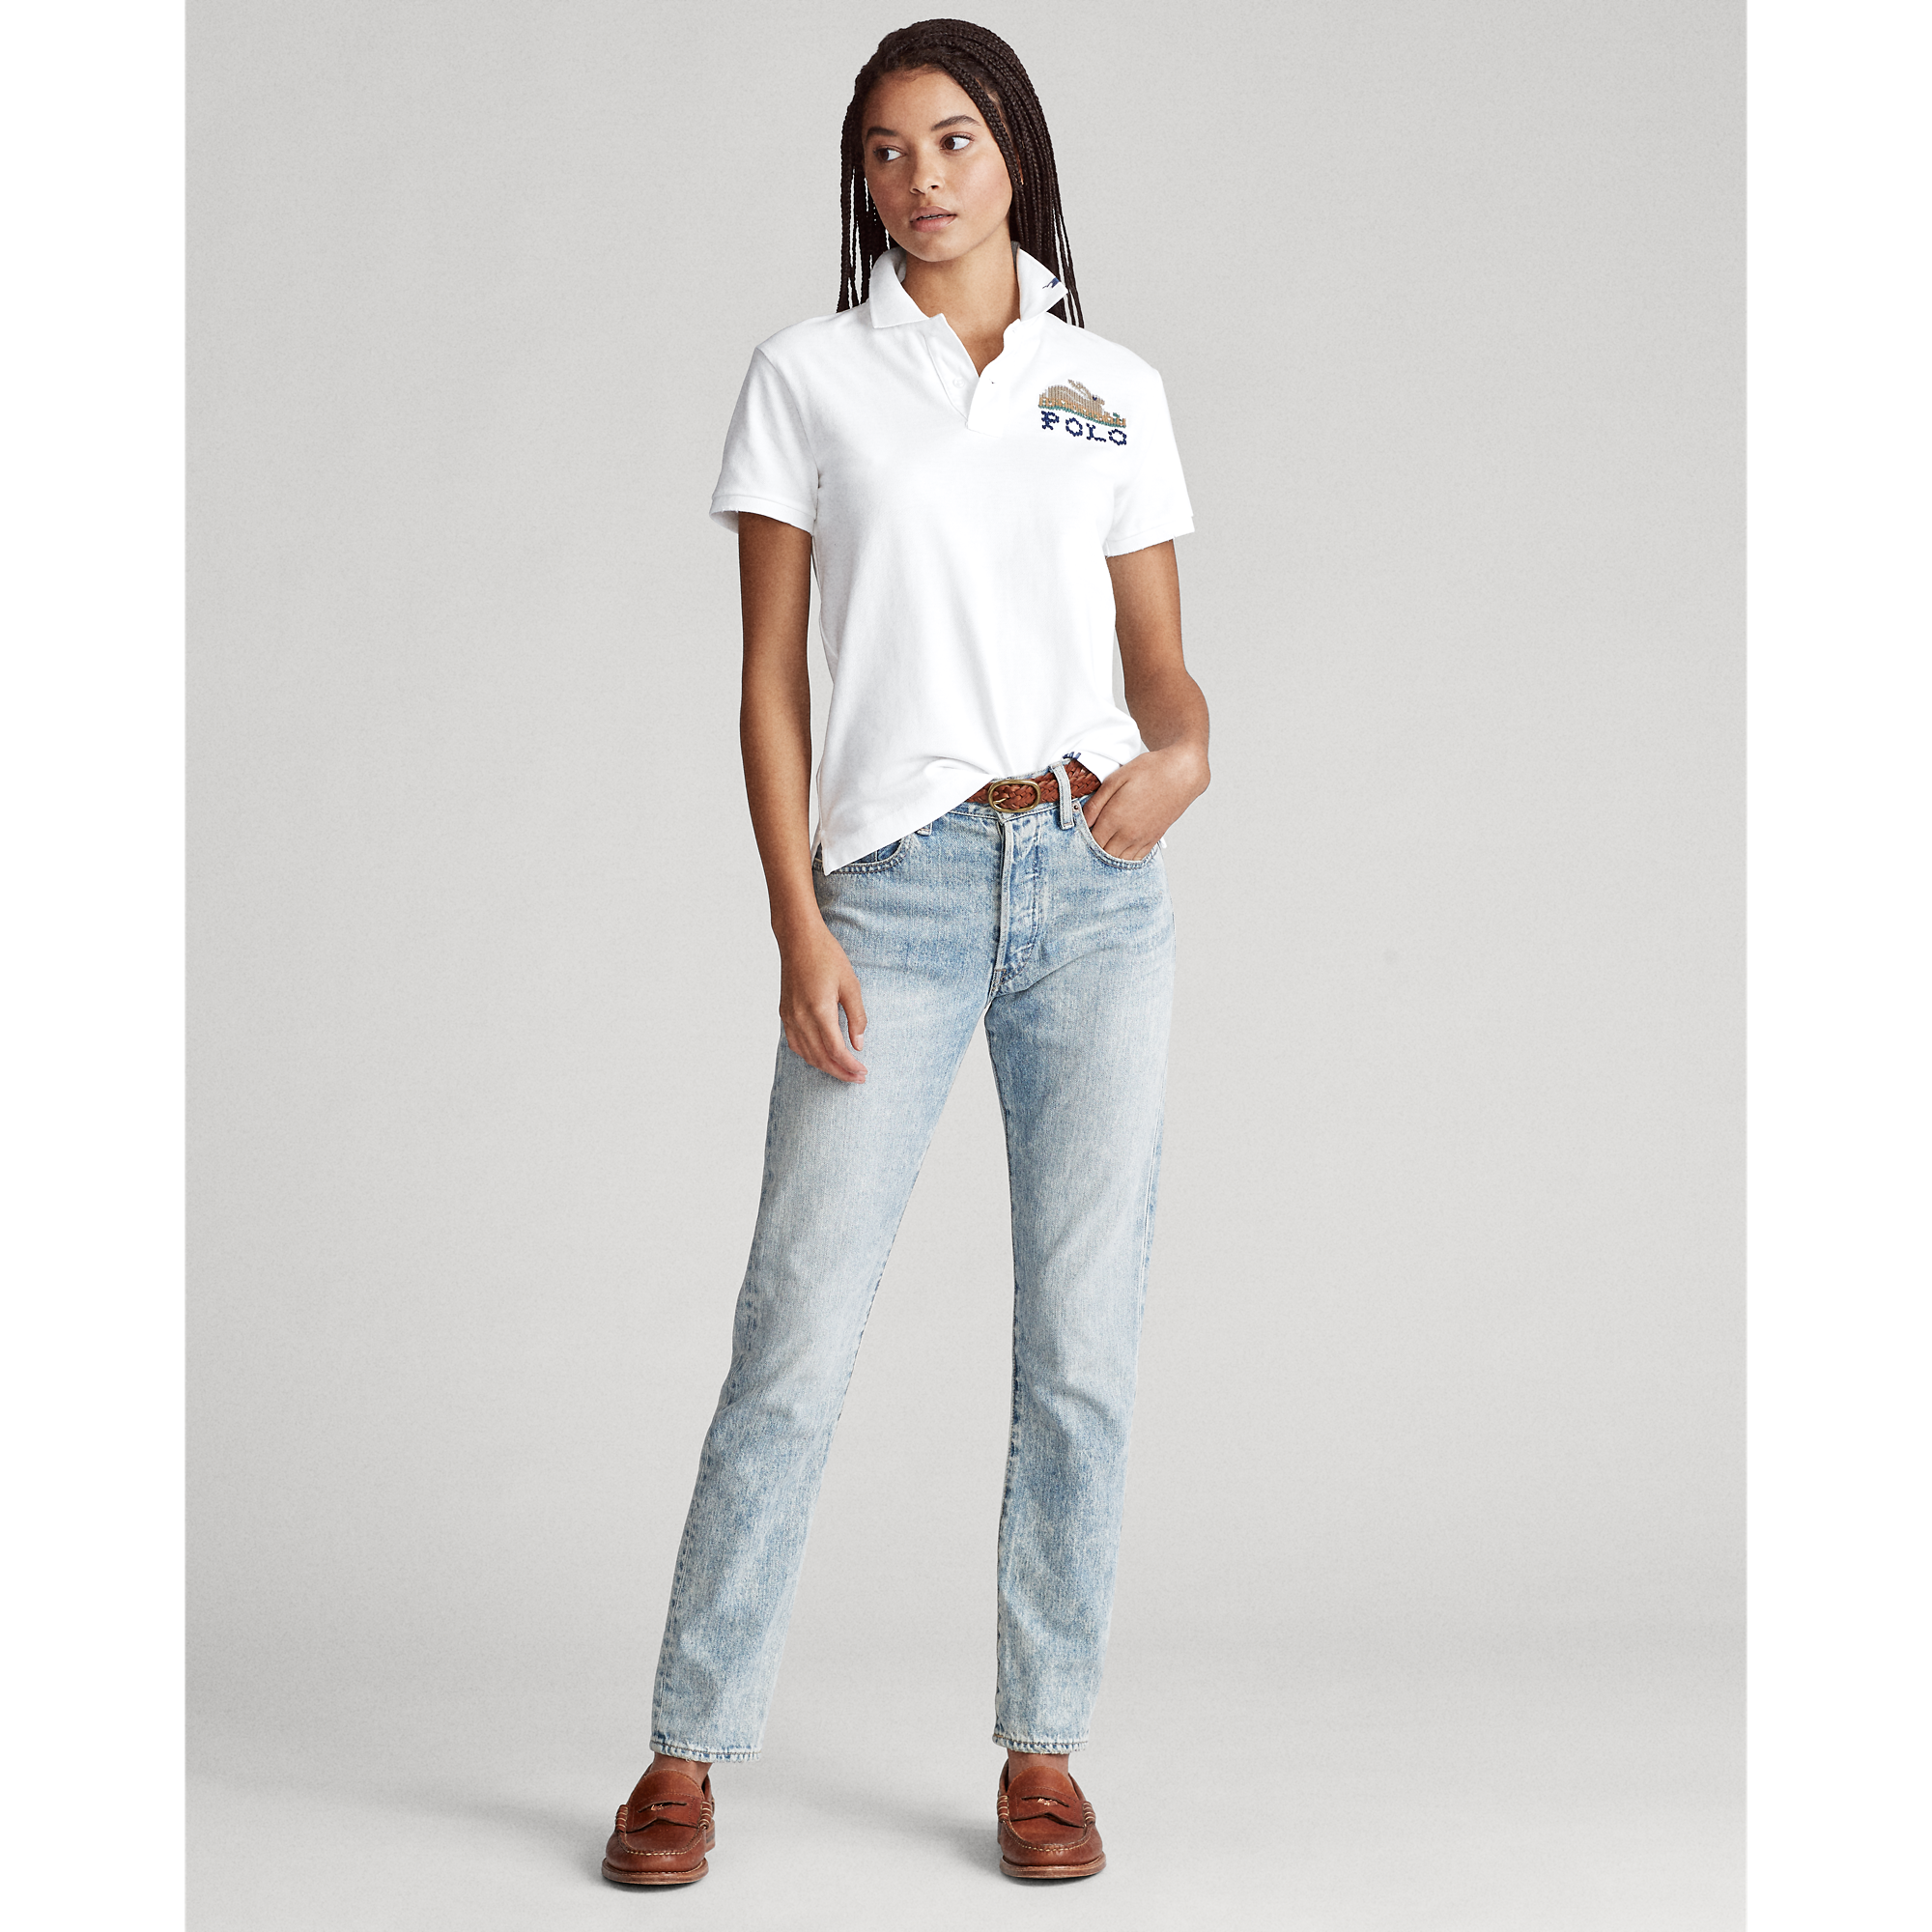 Ralph Lauren Classic Fit Embroidered Polo. 3